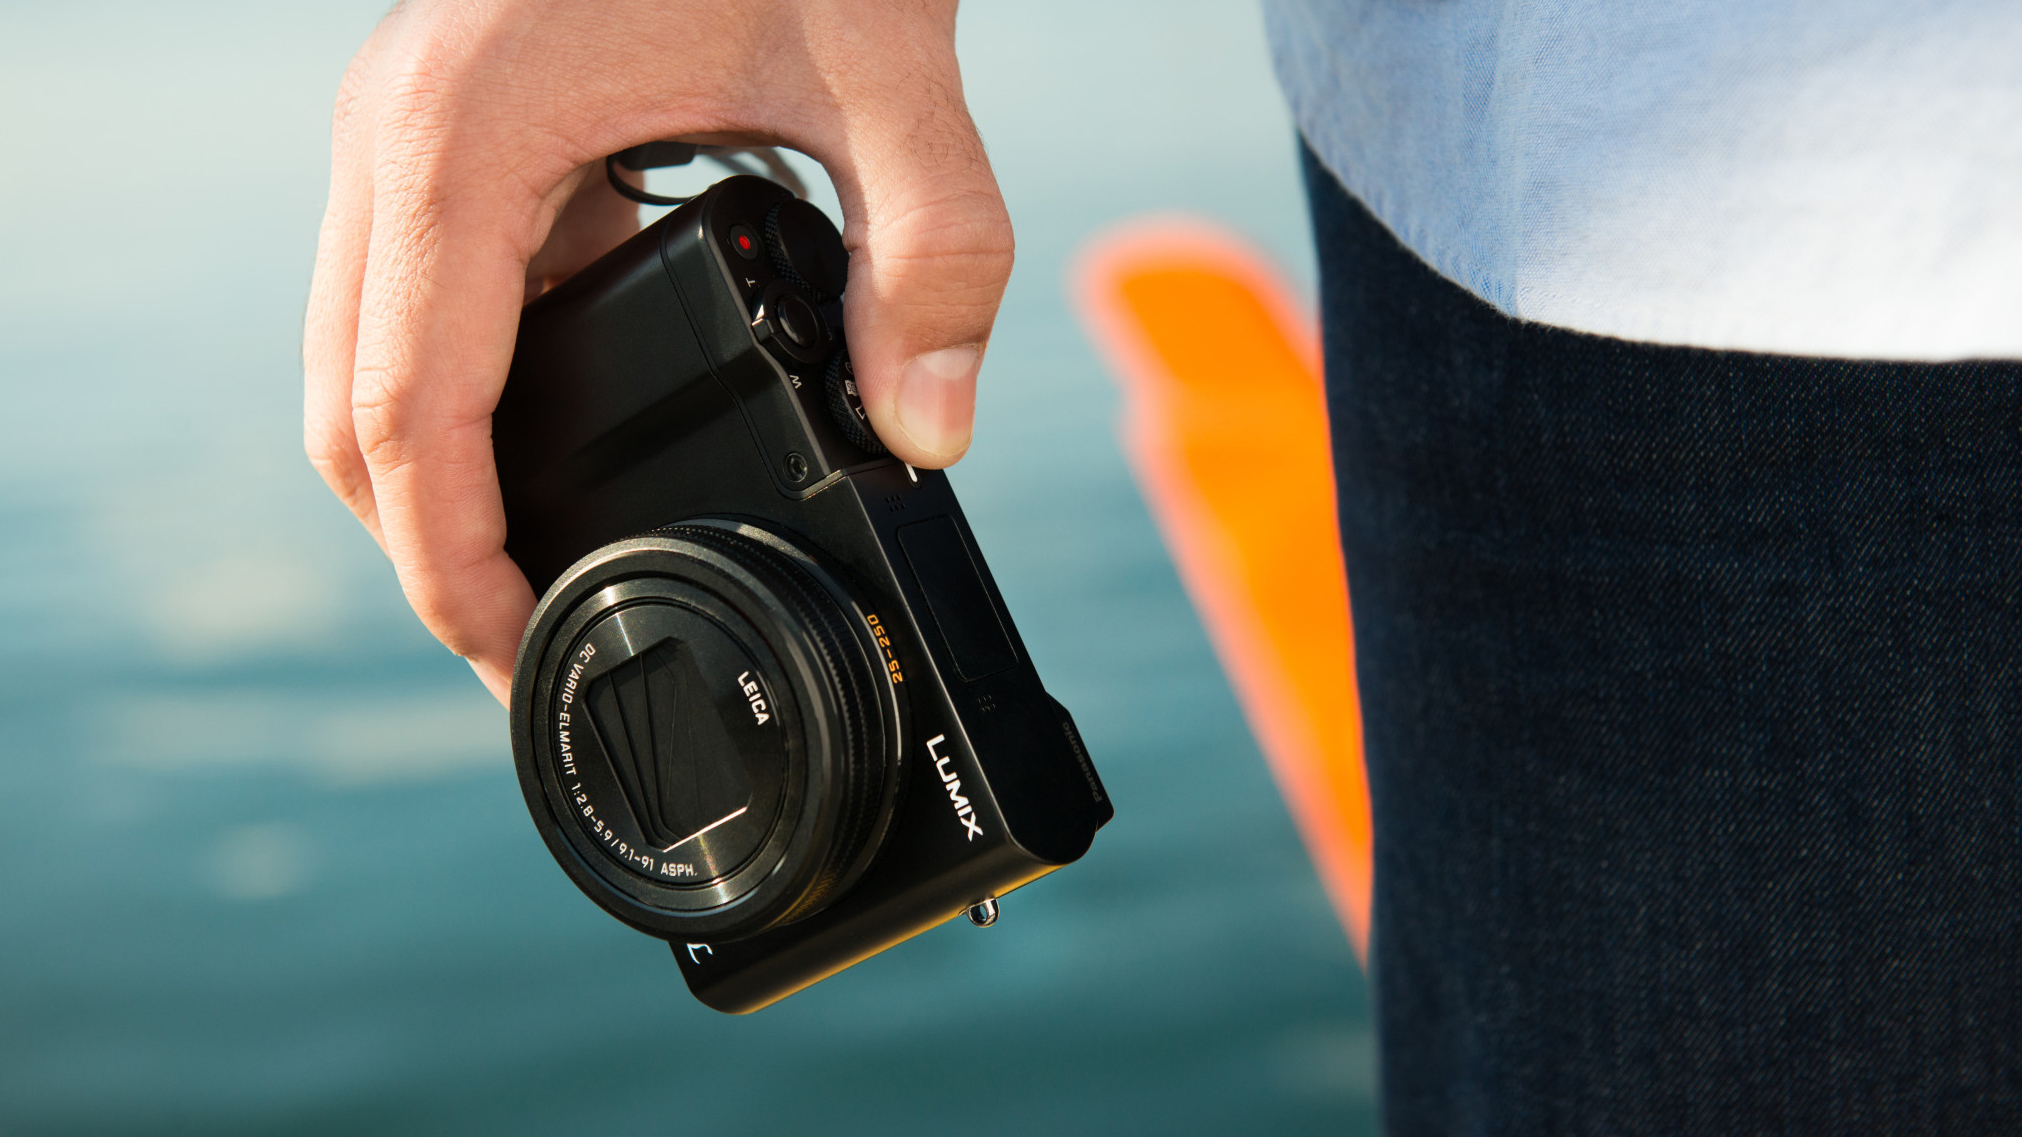 Best Compact Camera 2019: 10 Top Compact Cameras to Suit All Abilities 14